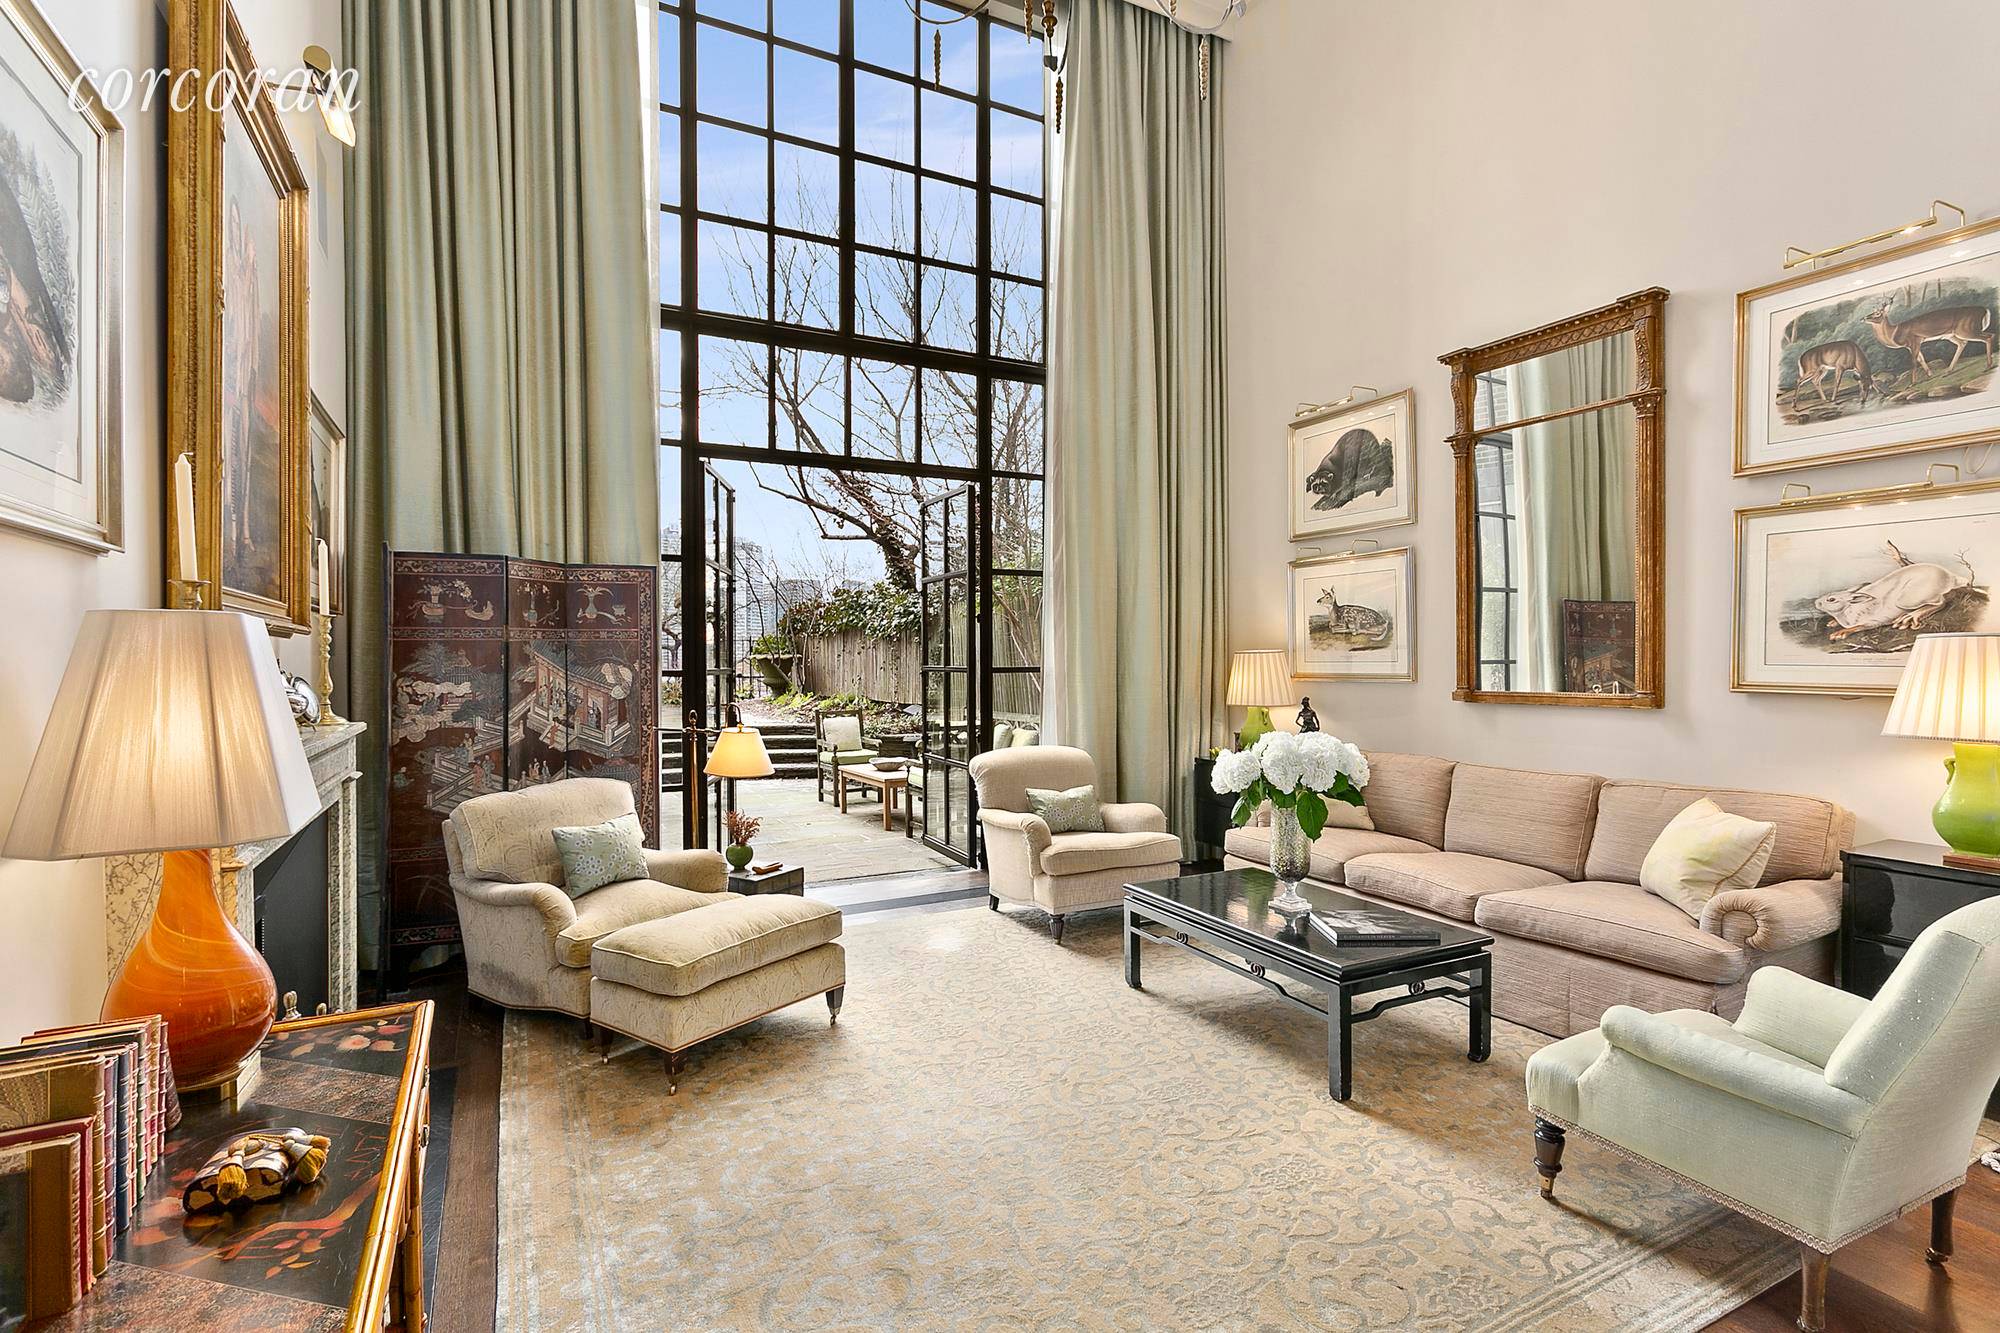 Enchanting, this one of a kind, ultra dramatic, mint condition, quadruplex Manhattan townhouse apartment is located on prestigious Beekman Place and offers the ultimate in privacy and tranquility.